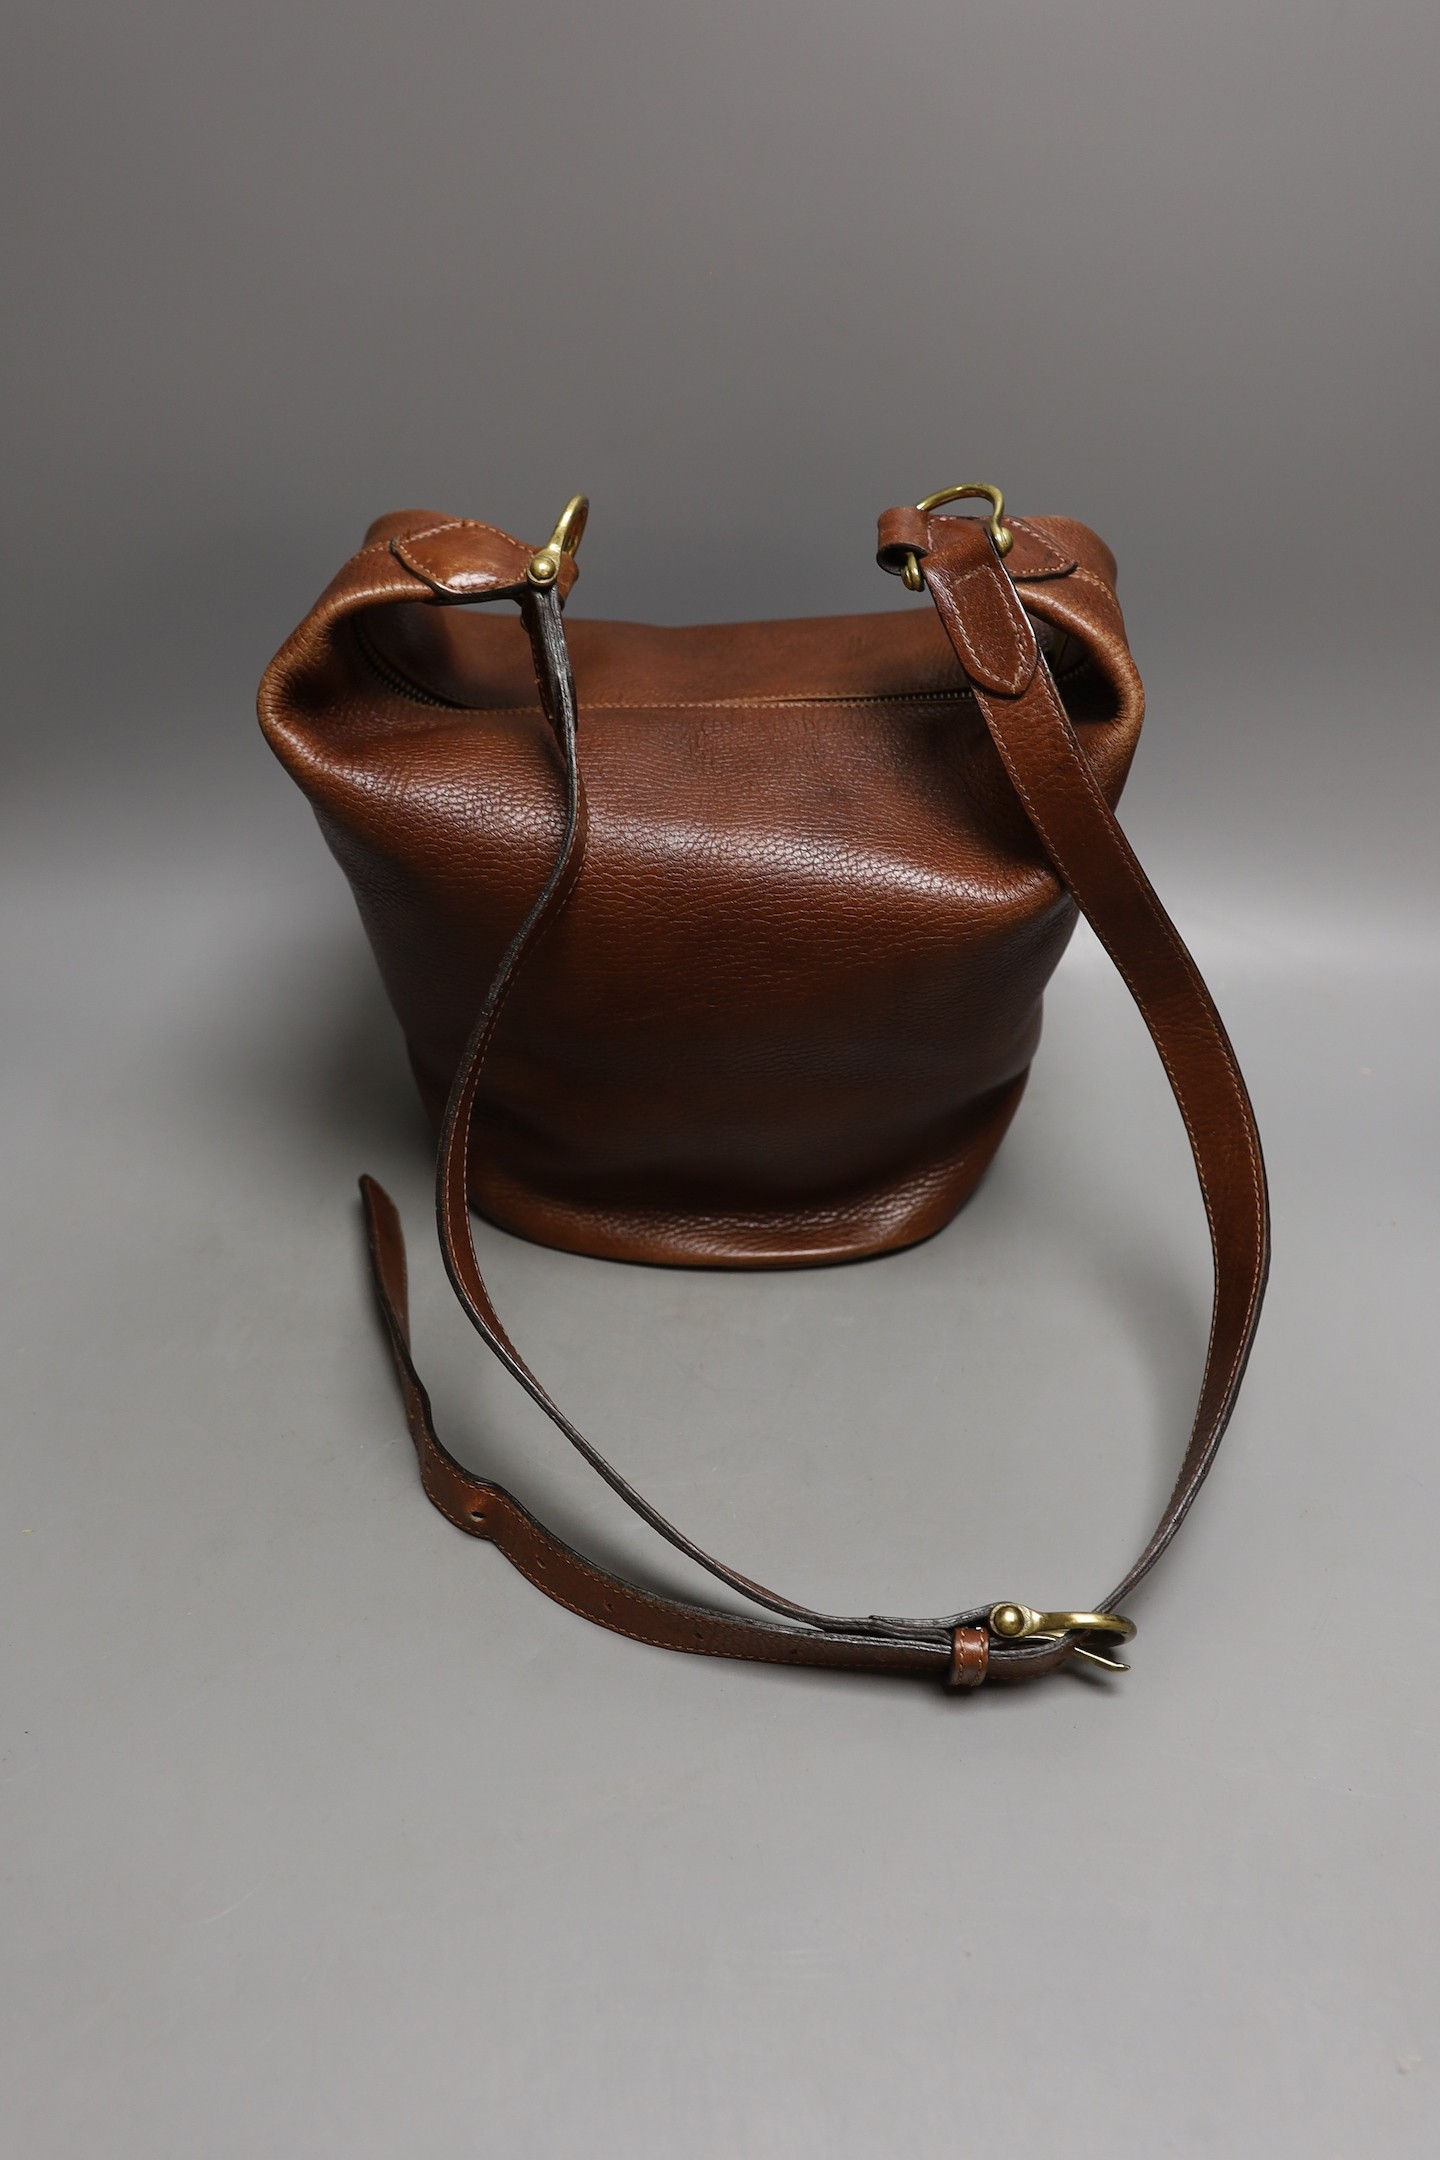 A brown leather Mulberry bucket bag - serial number 621330